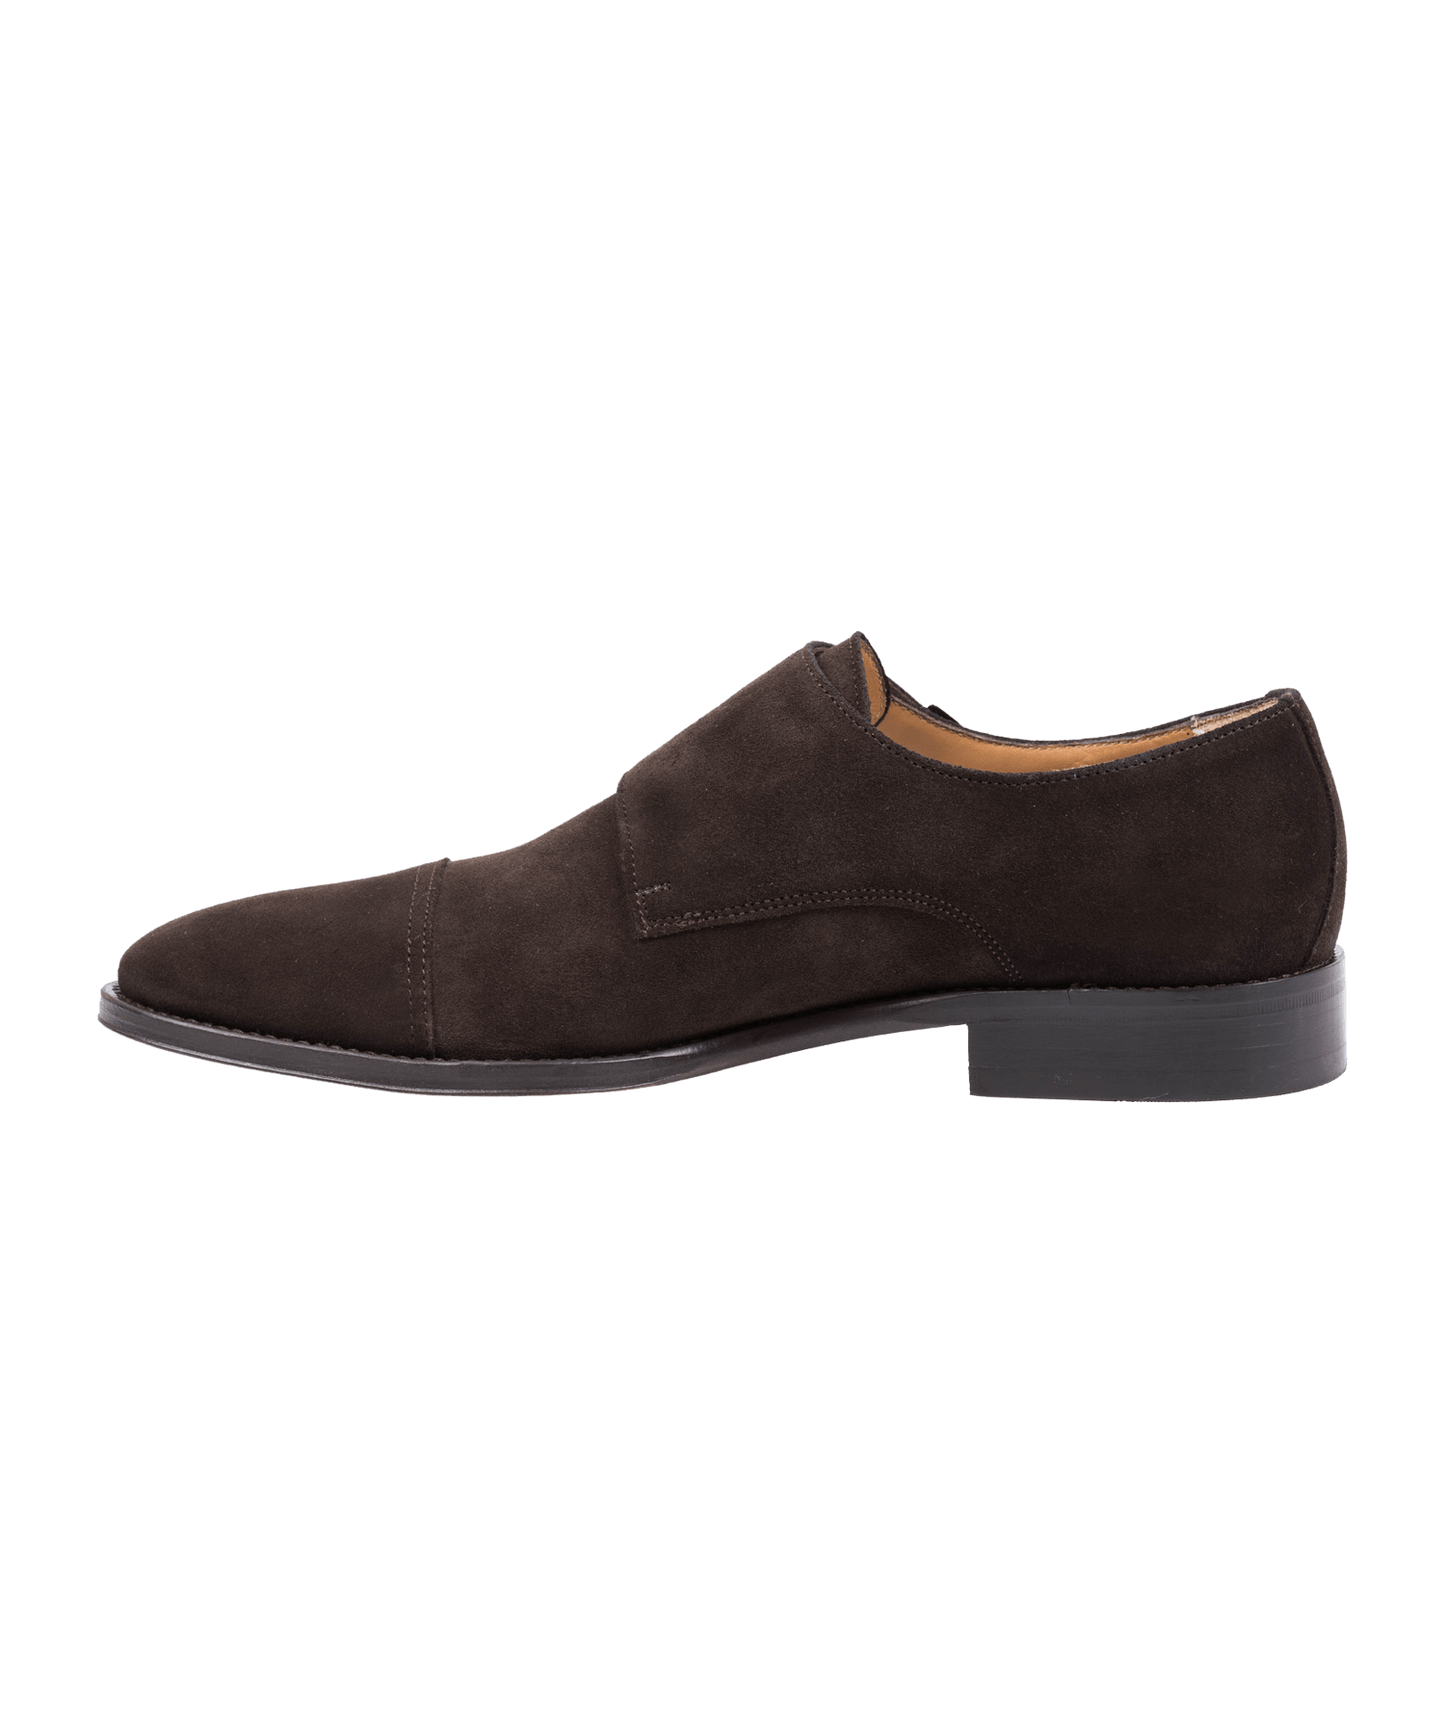 DOUBLE MONK STRAPS SUEDE 10 / Donkerbruin